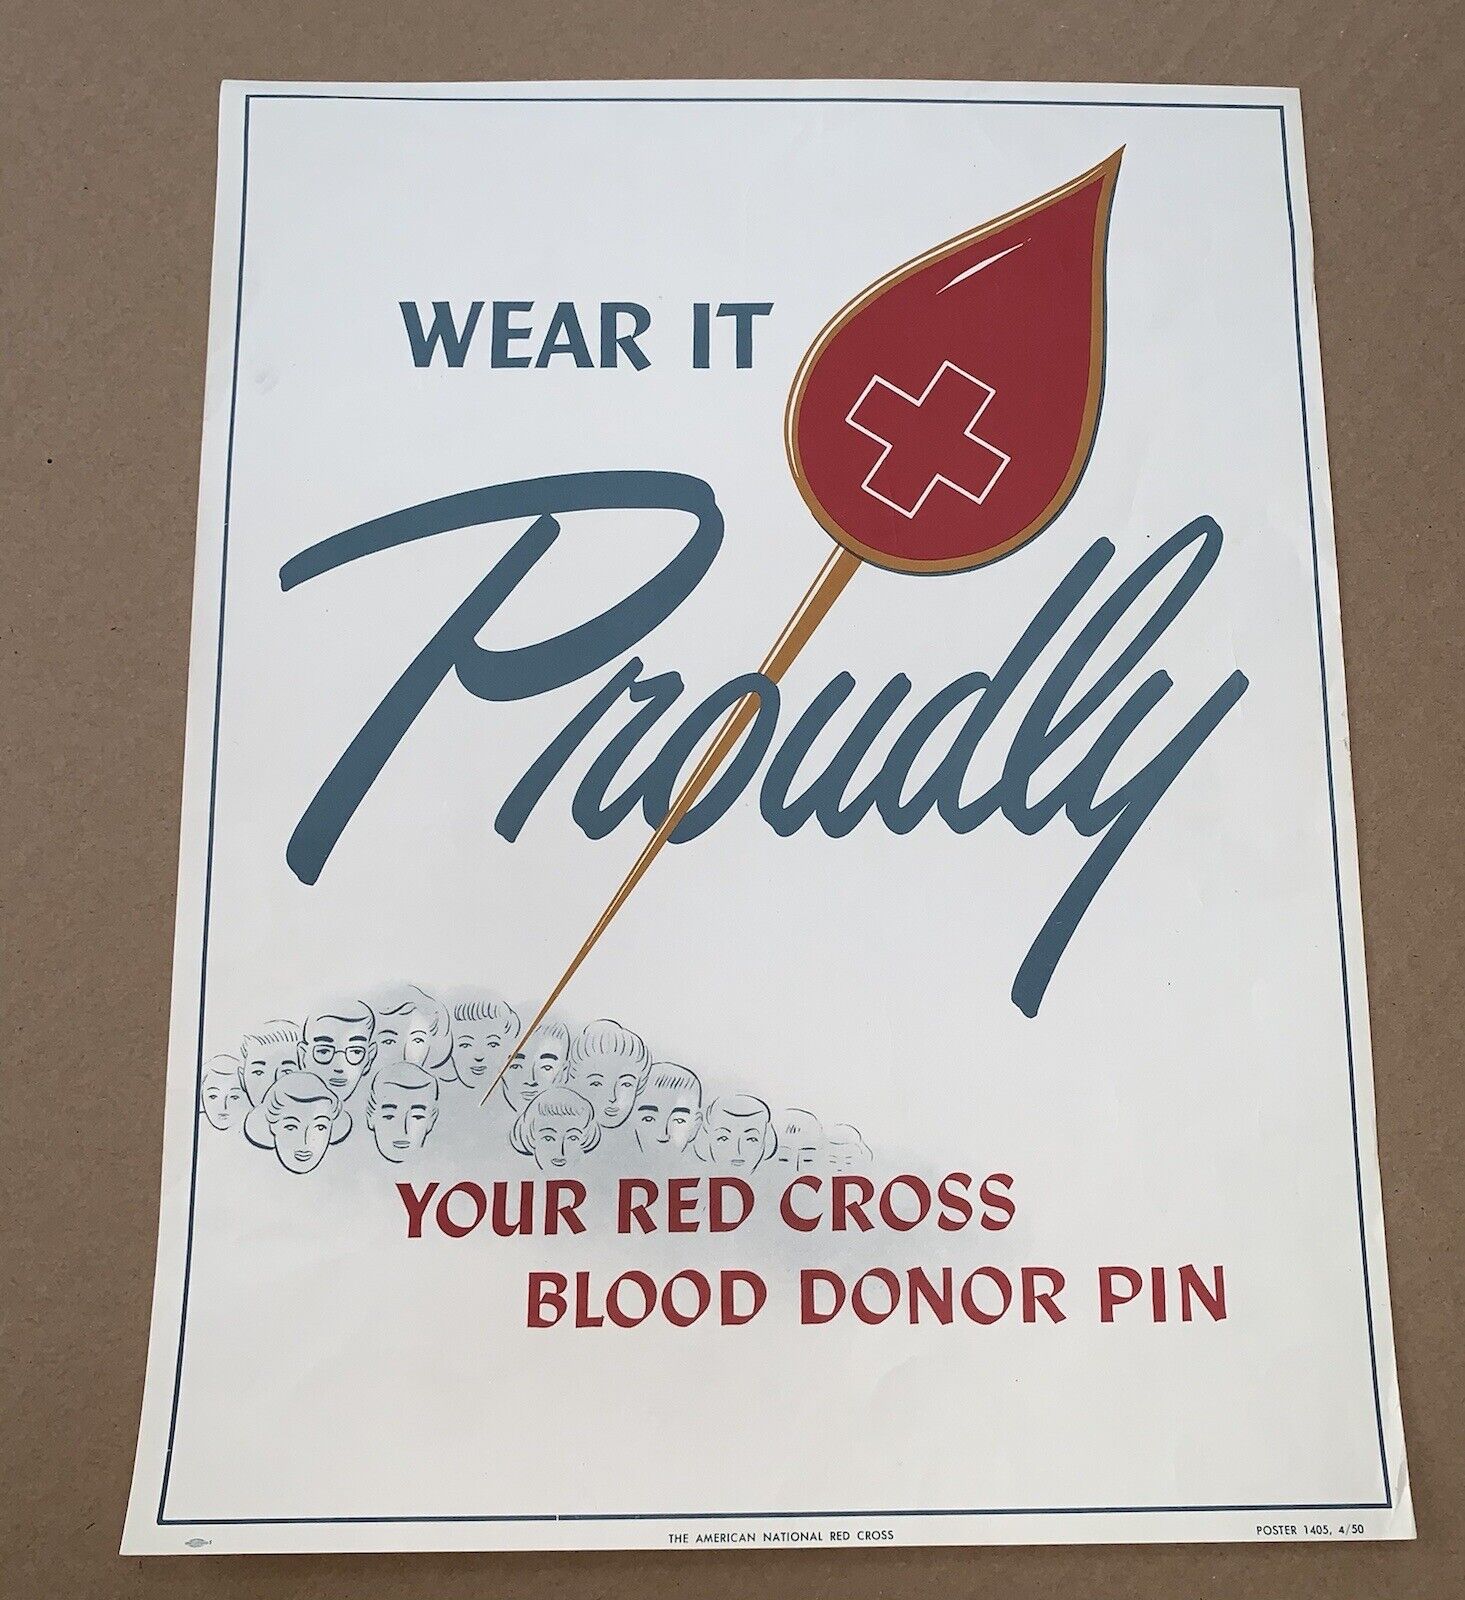 Vintage Original Red Cross Blood Donor Poster Recruitment Pin Wear It Proudly